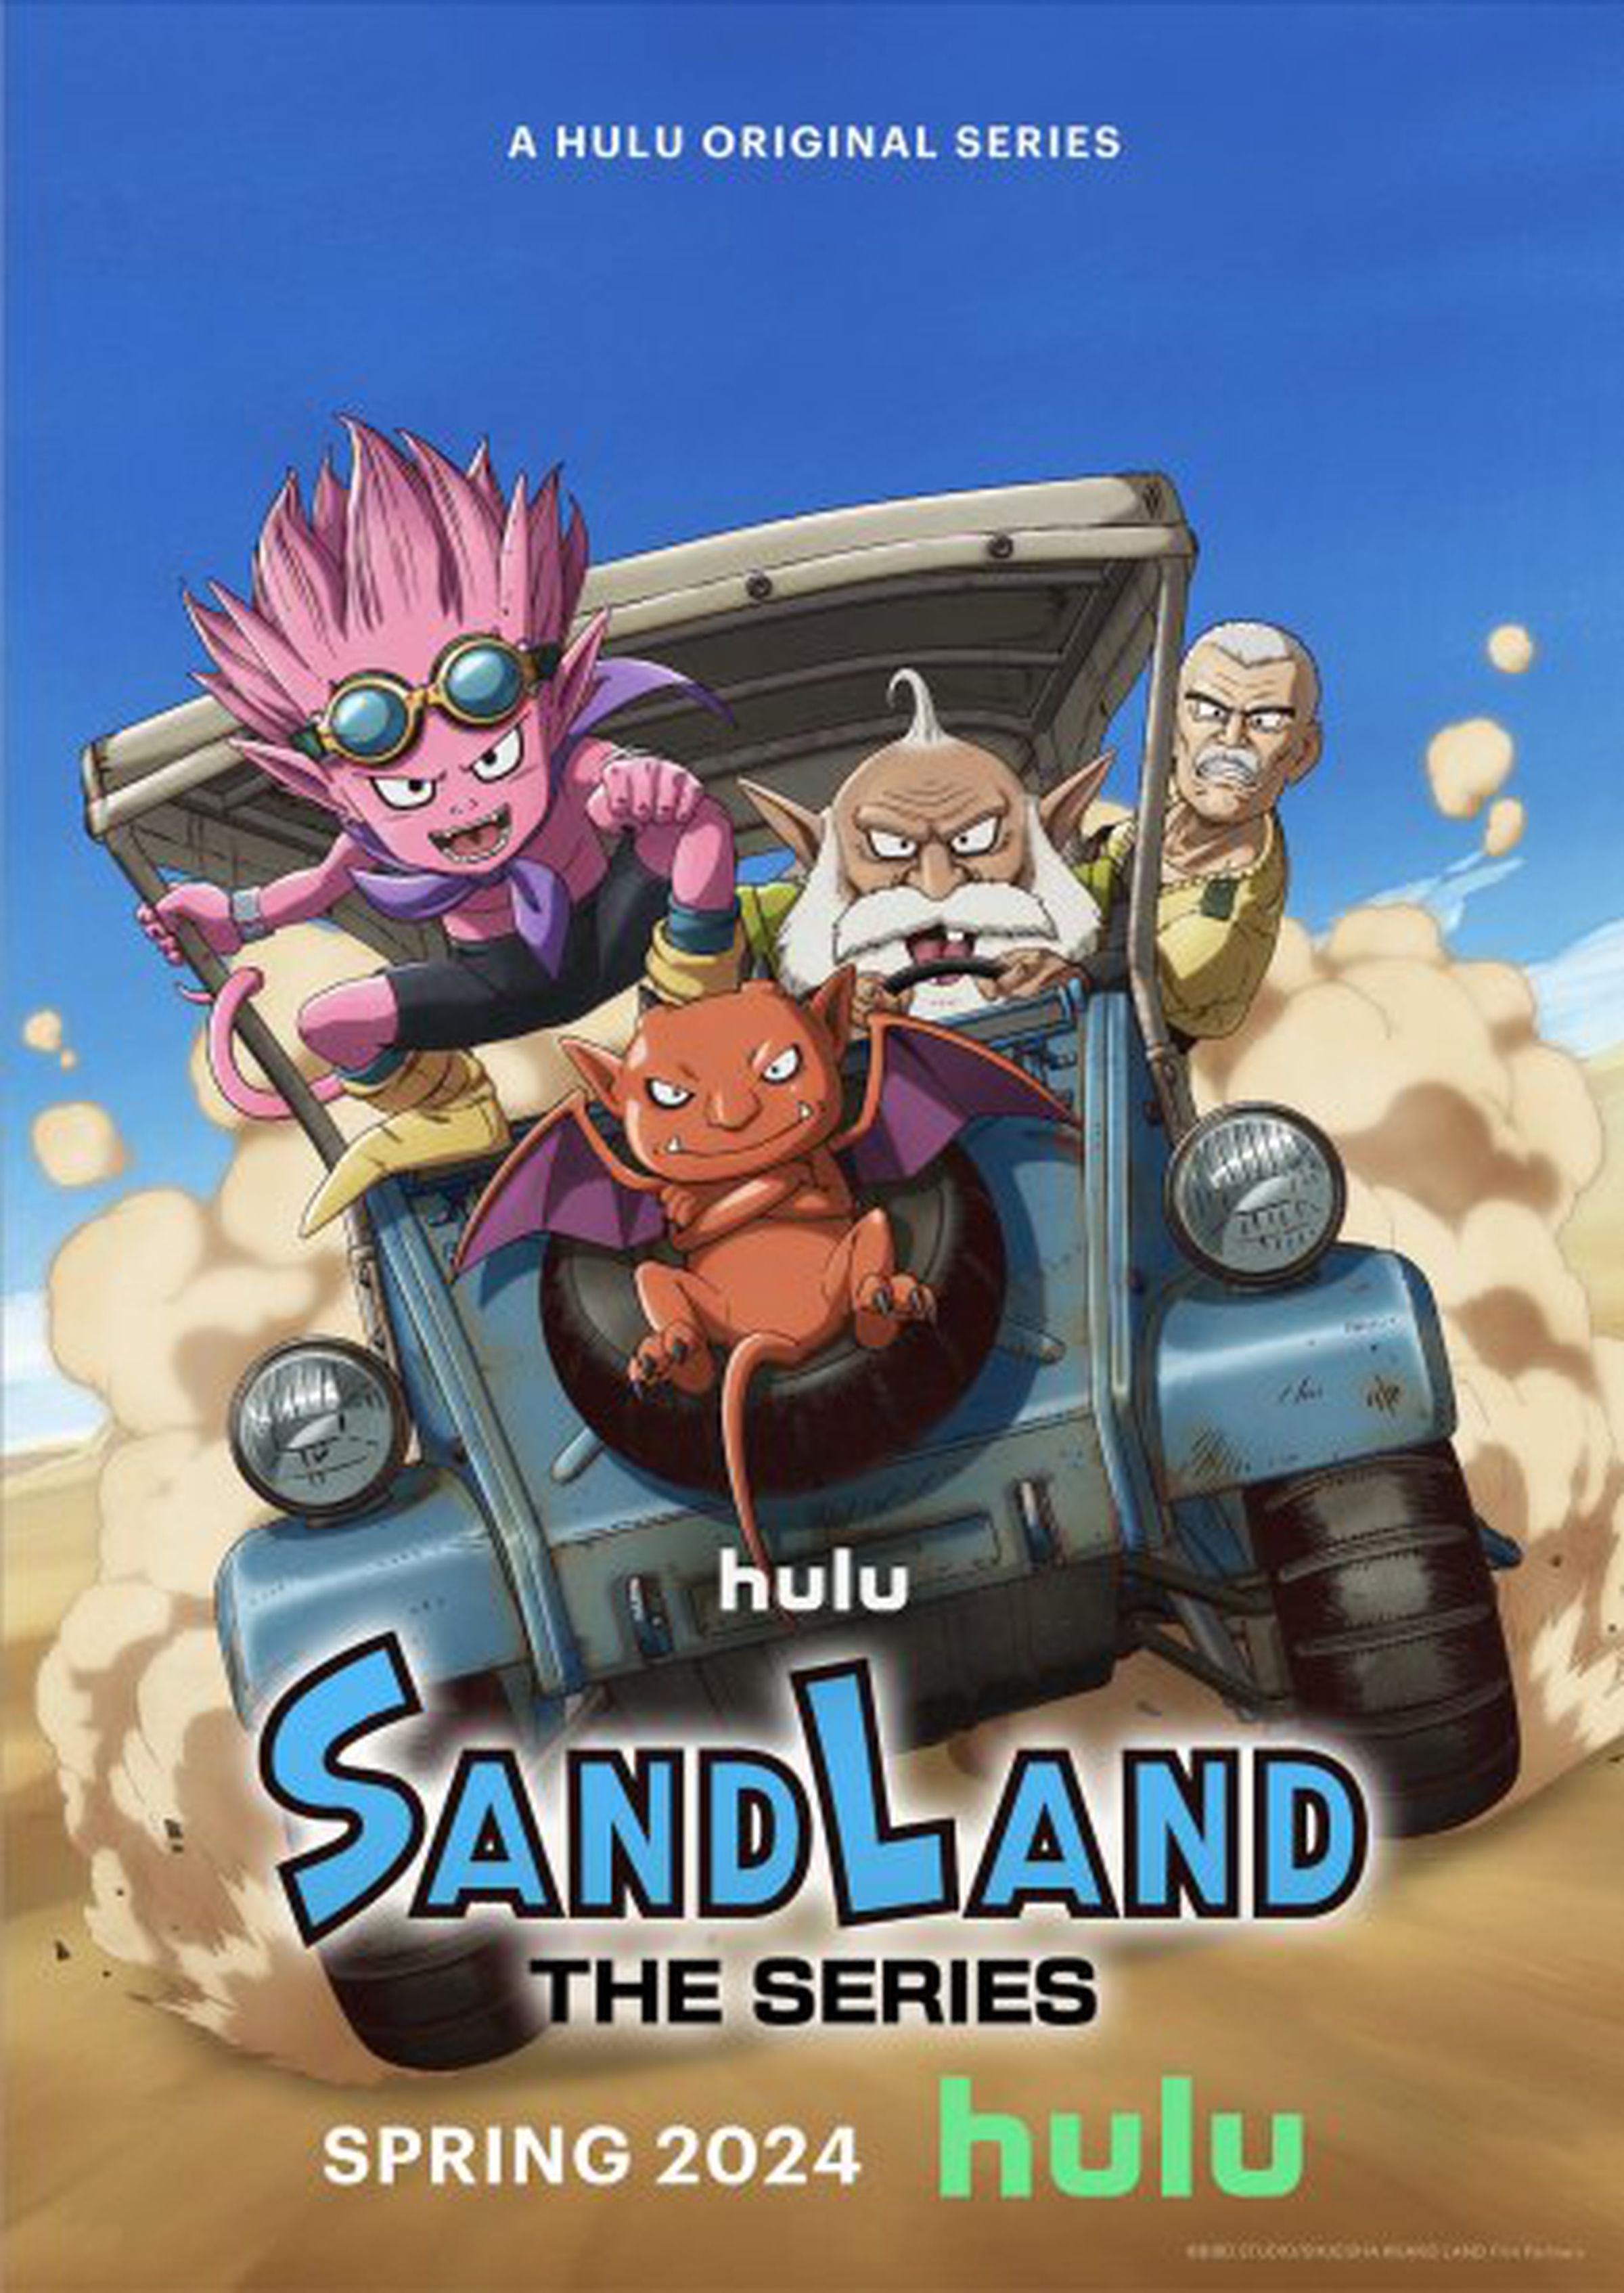 Promotional artwork for the Sand Land TV show, with characters riding a dune buggy-like vehicle through the desert.